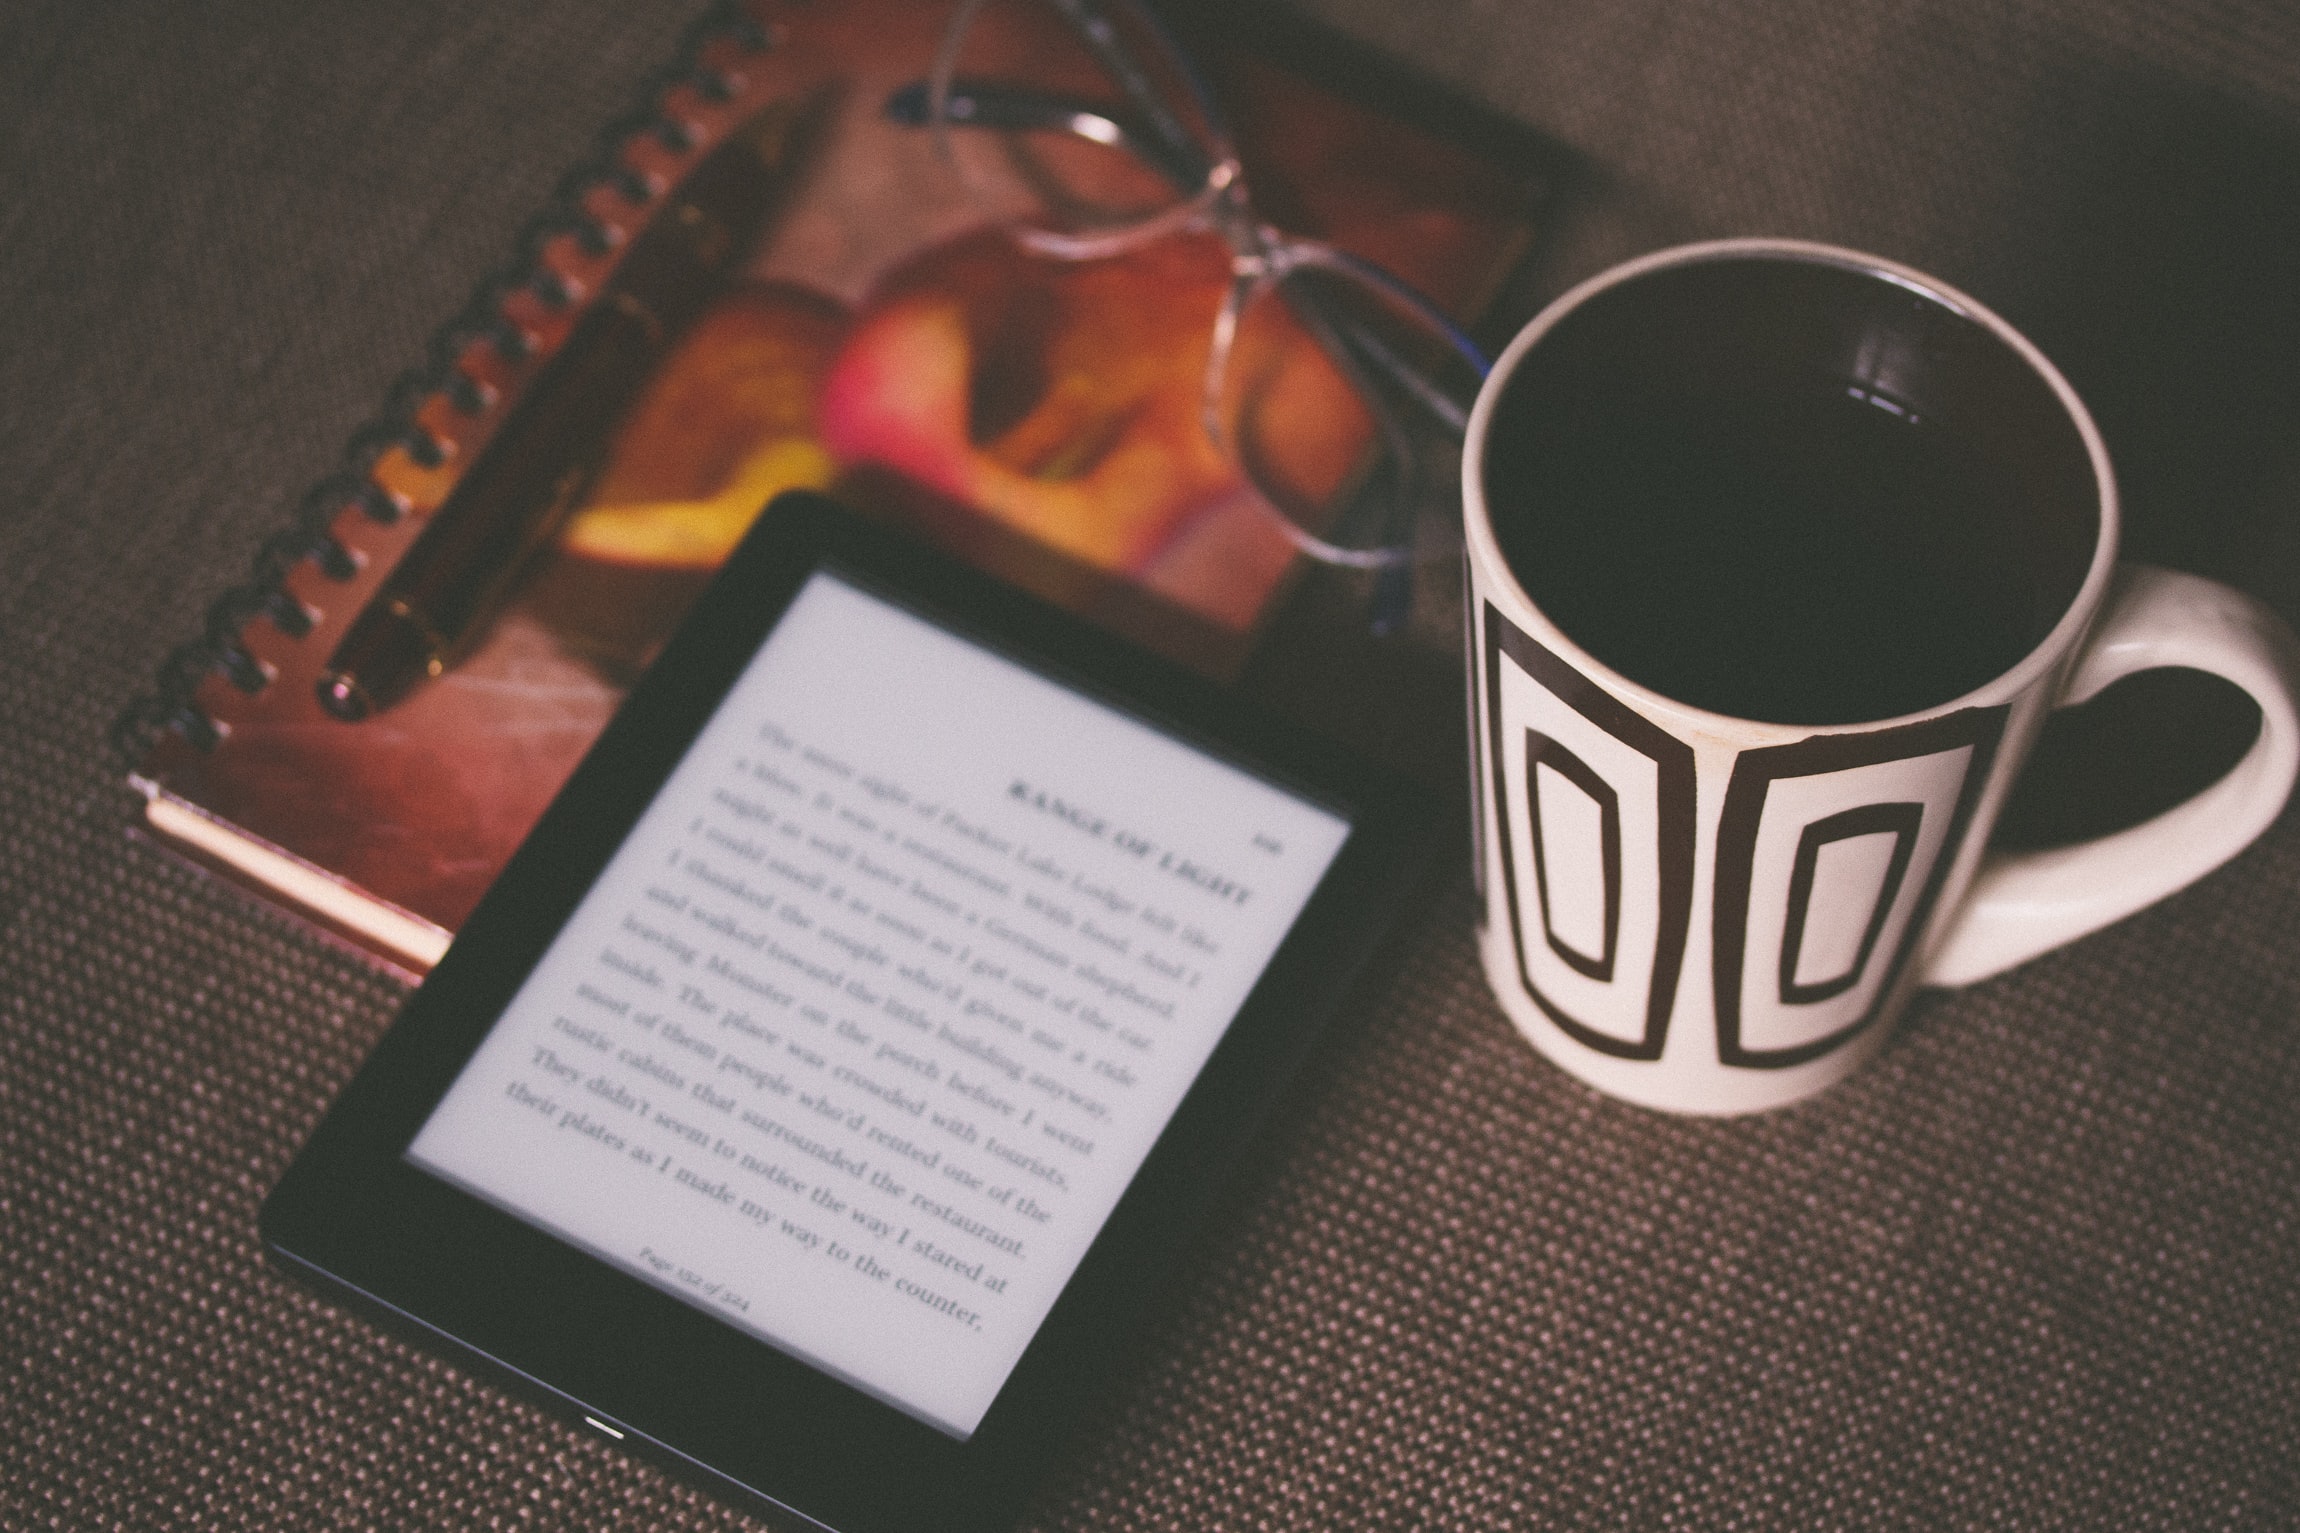 Top 10 Advantages of eBooks over Printed Books | The Bookish Elf